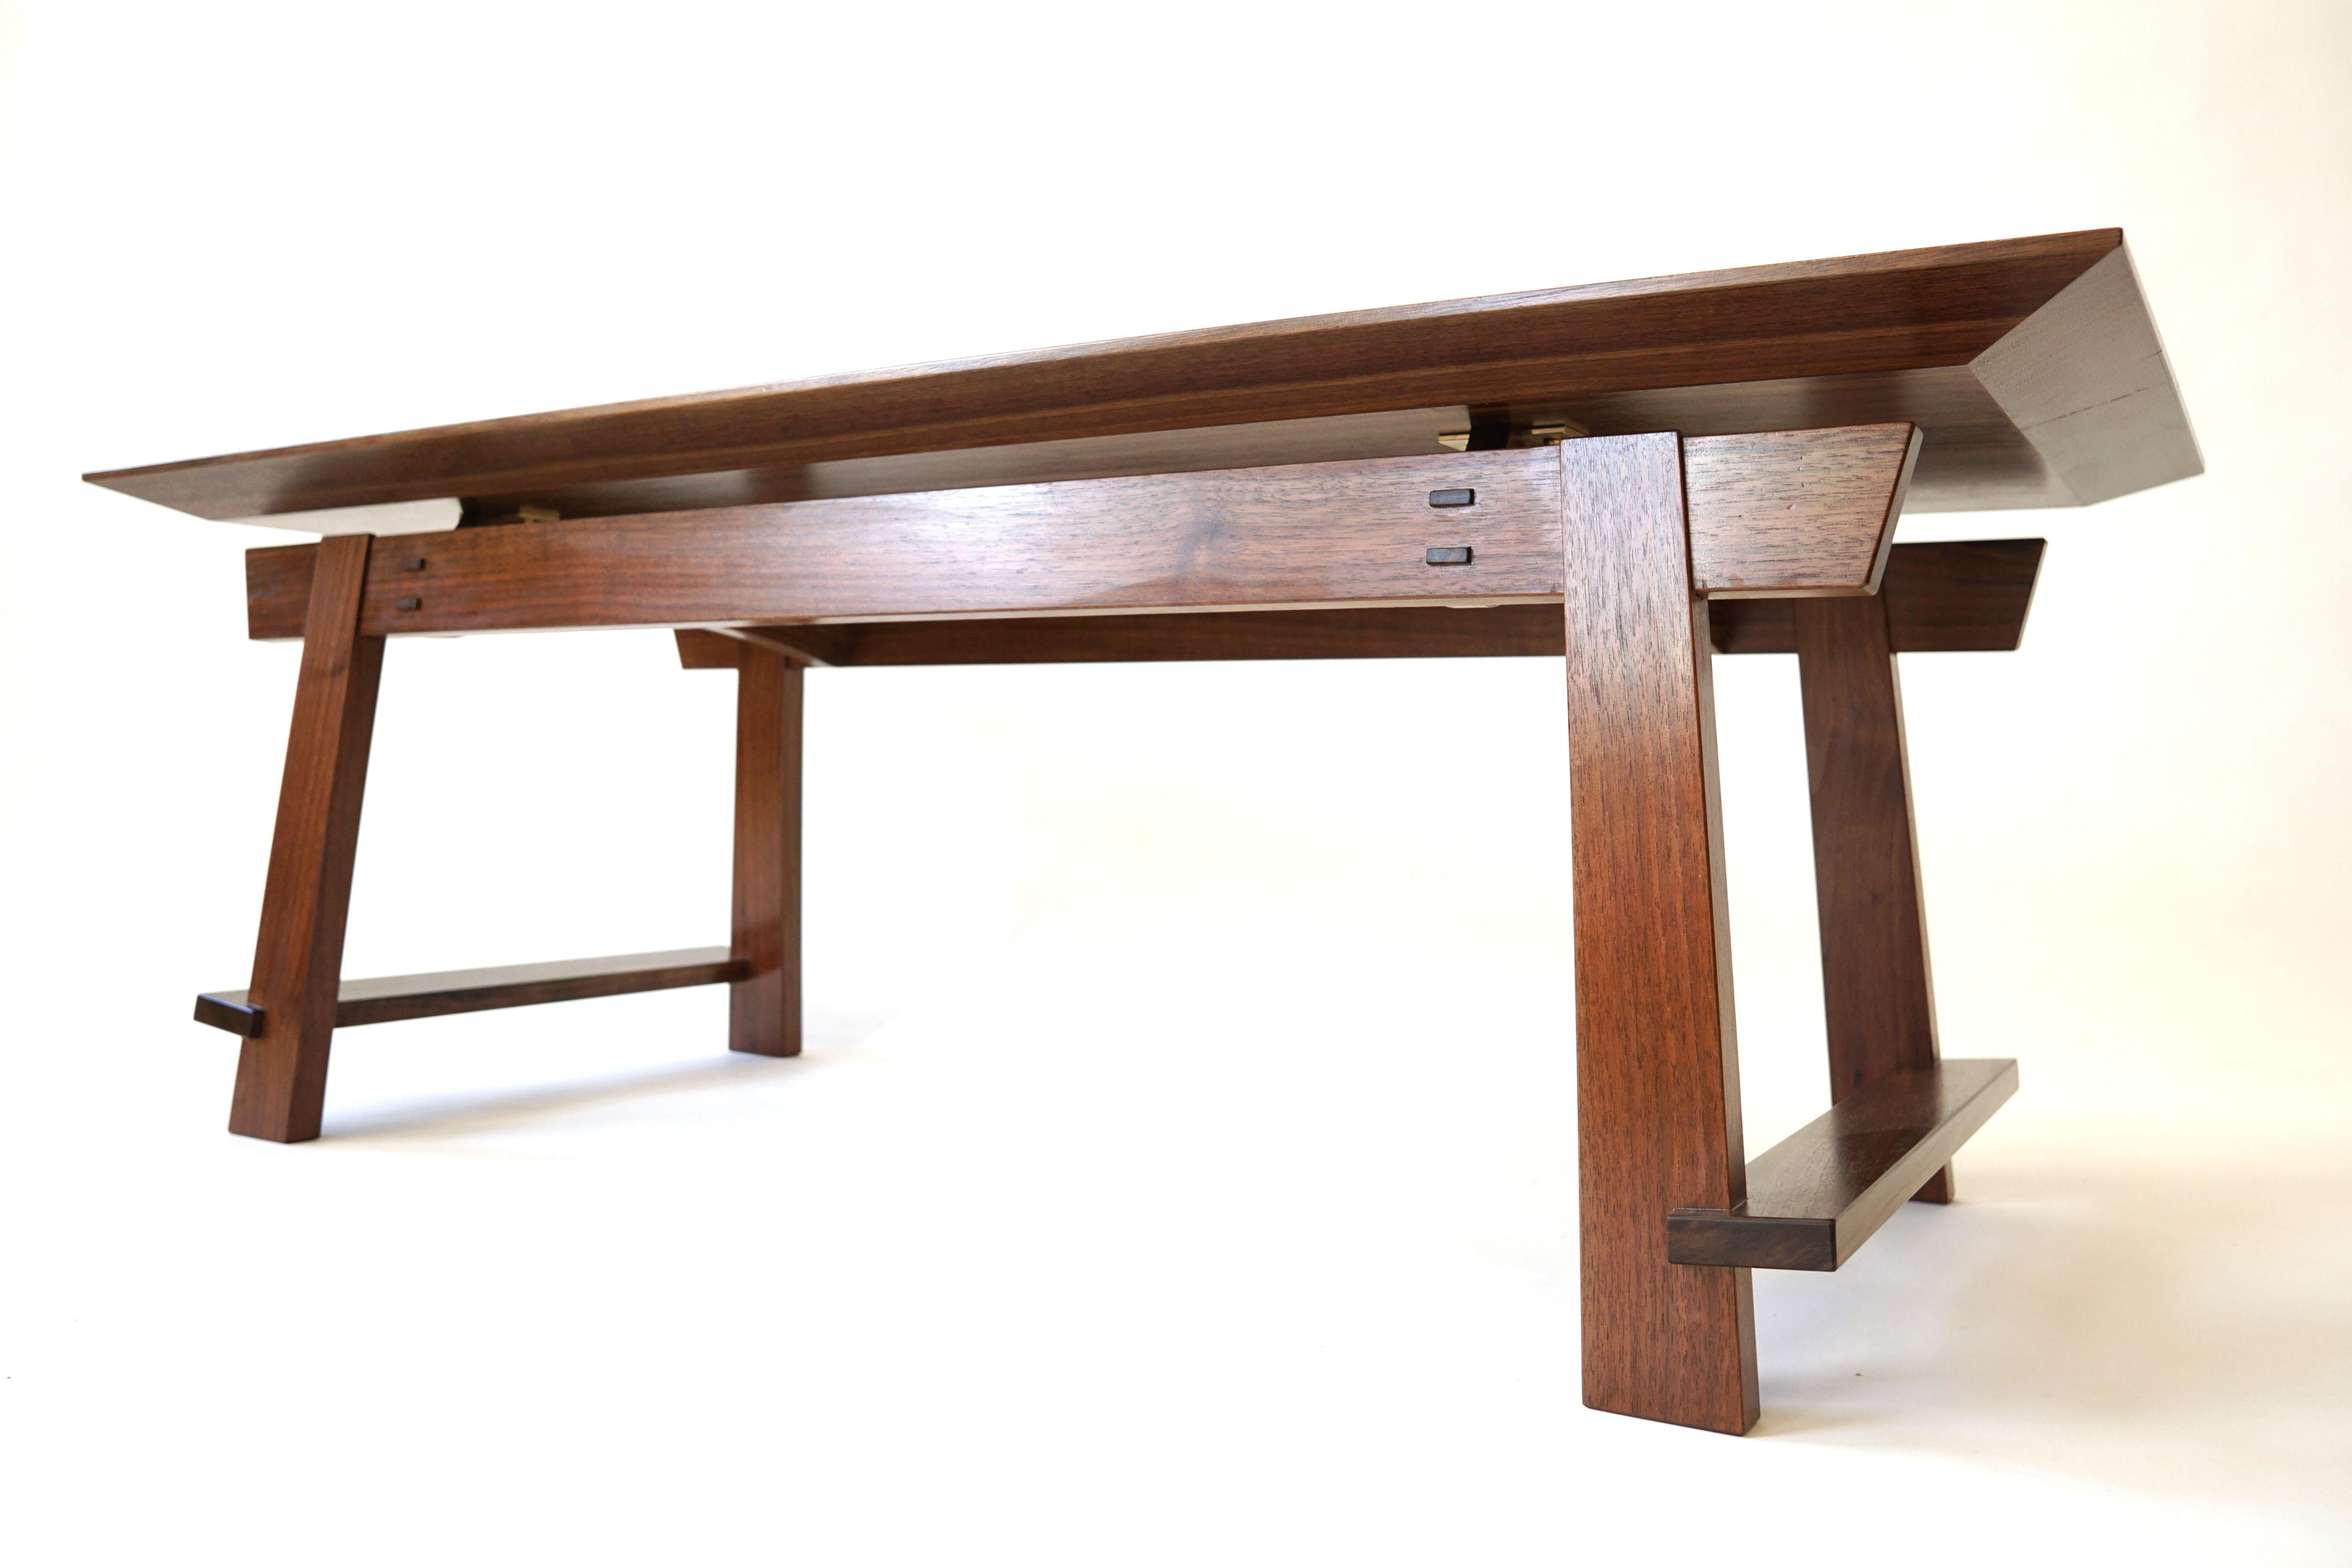 Rilley Coffee Table, Exposed Joinery, Handcrafted in Walnut For Sale 2